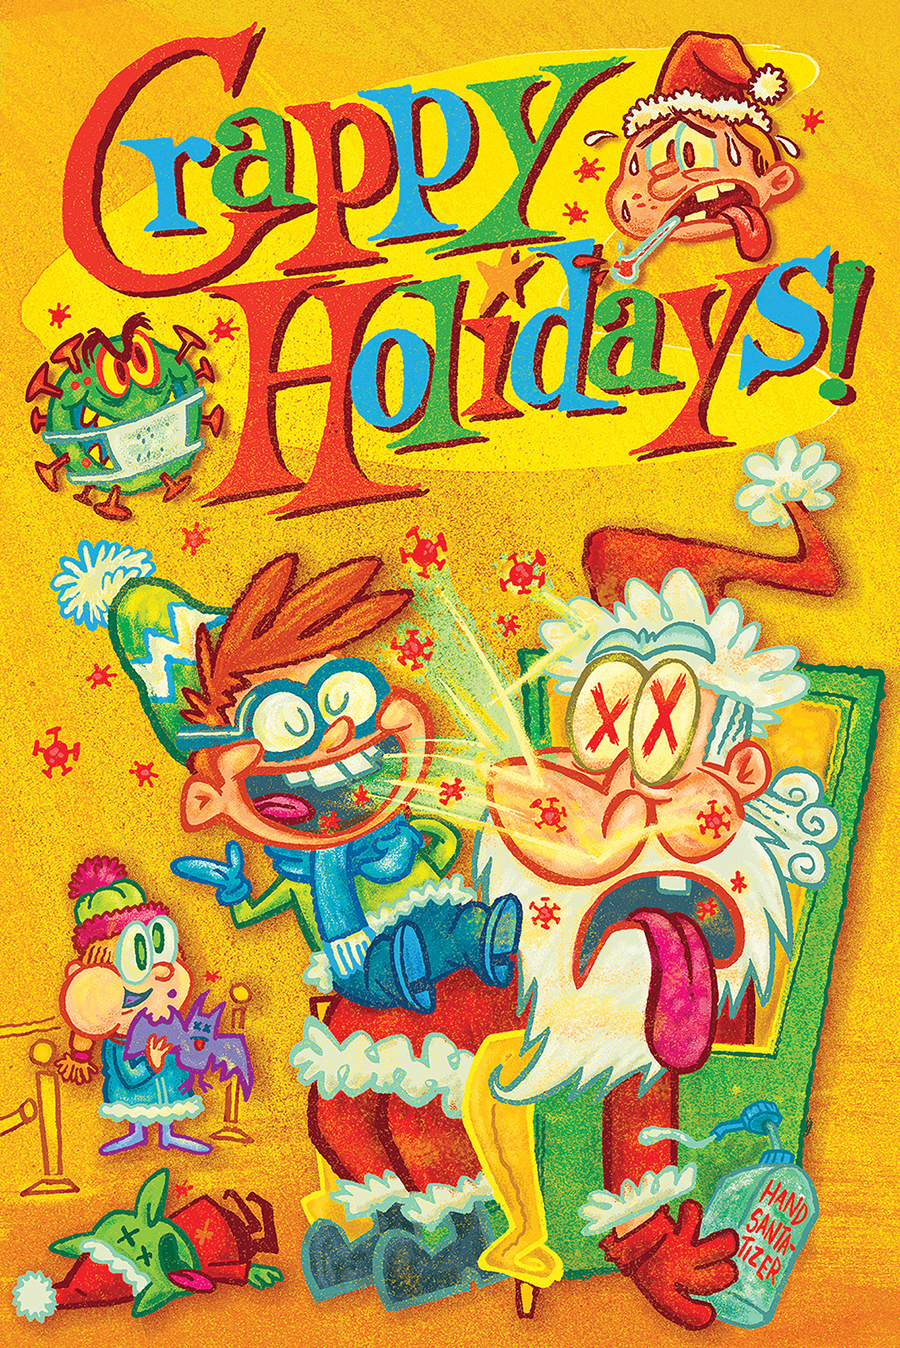 Crappy-Holidays-front